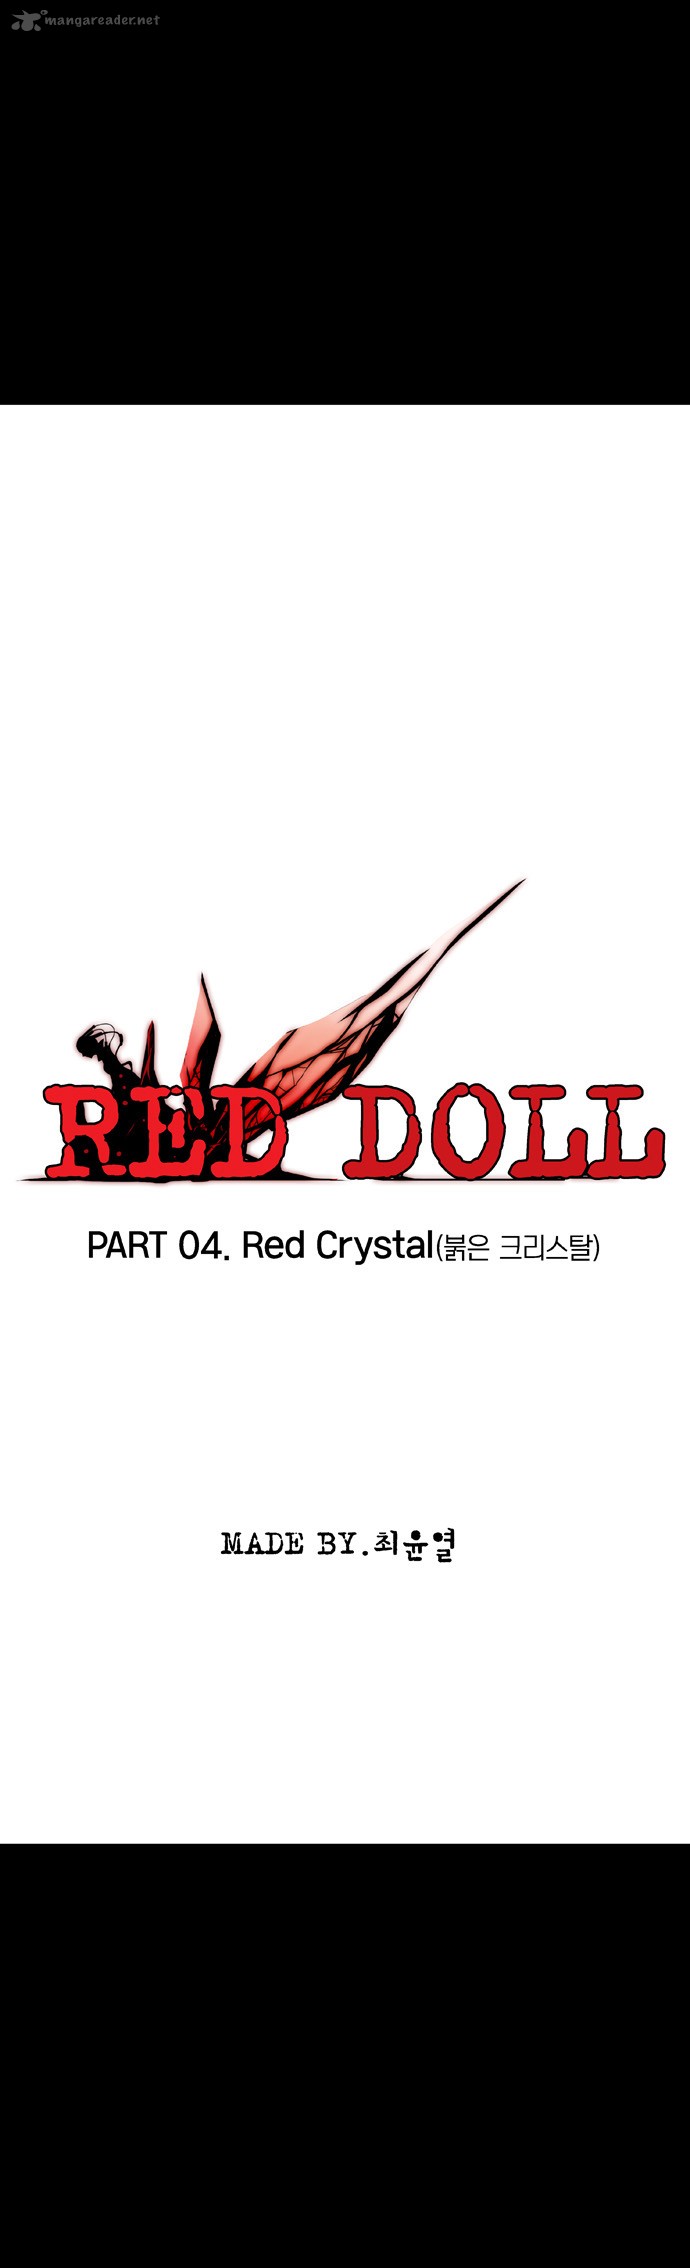 red_doll_4_8